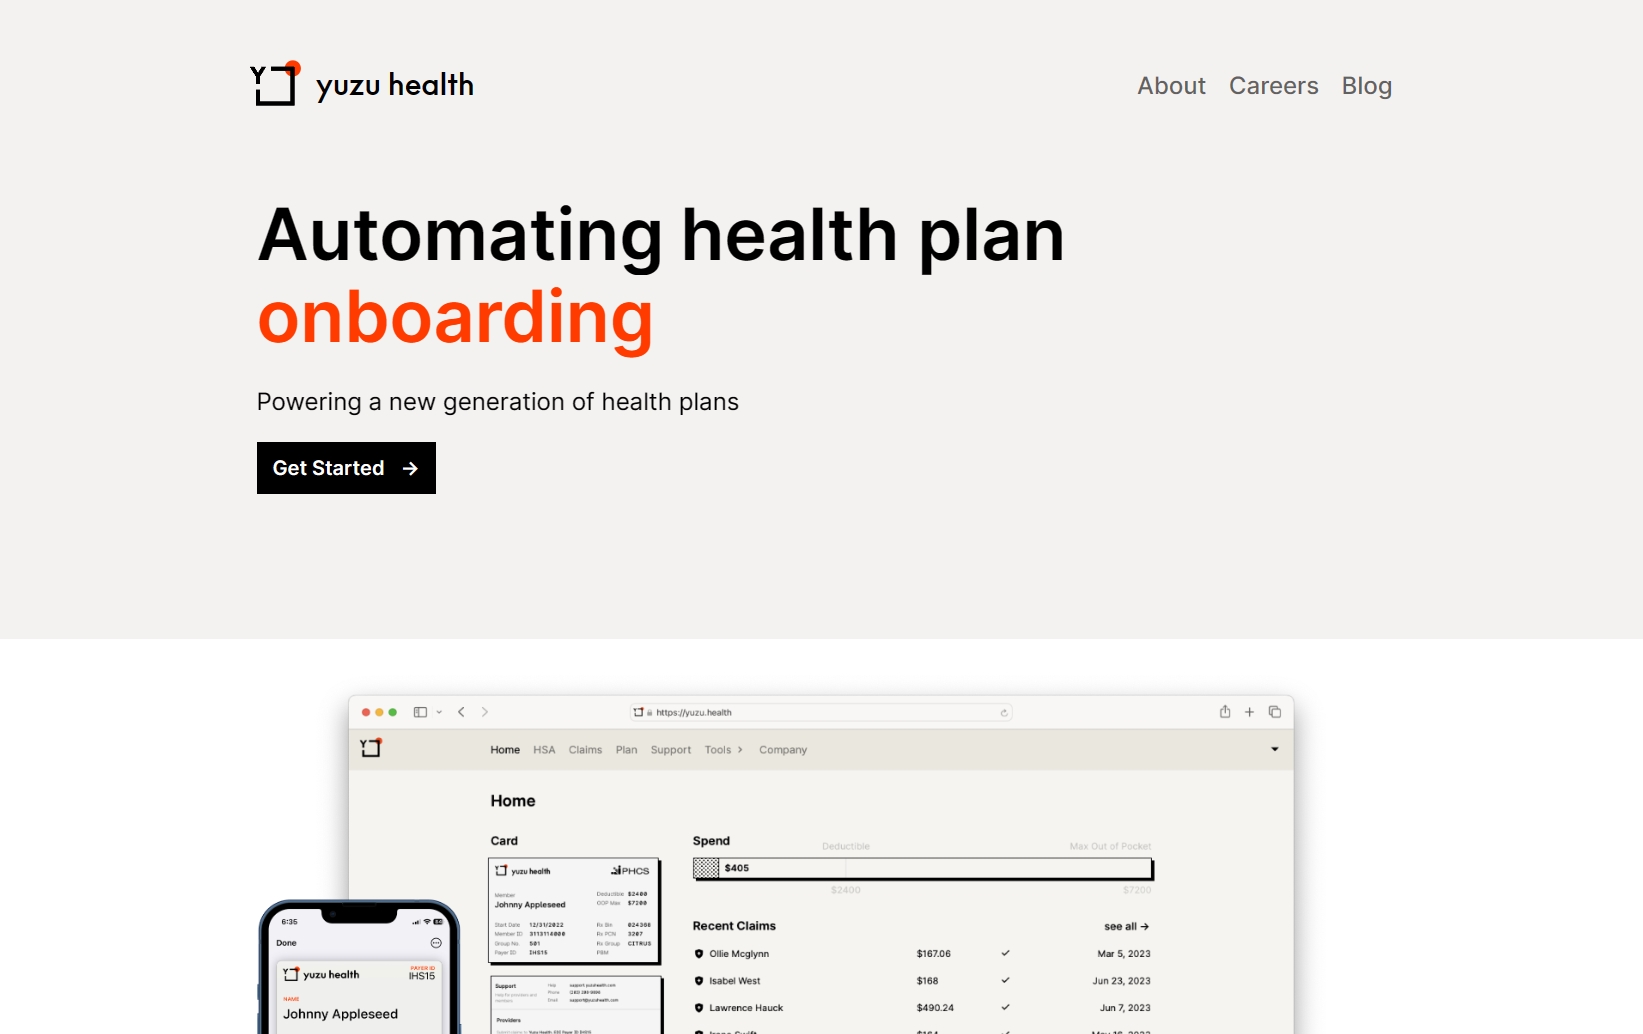 yuzu-introduces-customizable-and-affordable-health-plans-for-small-businesses